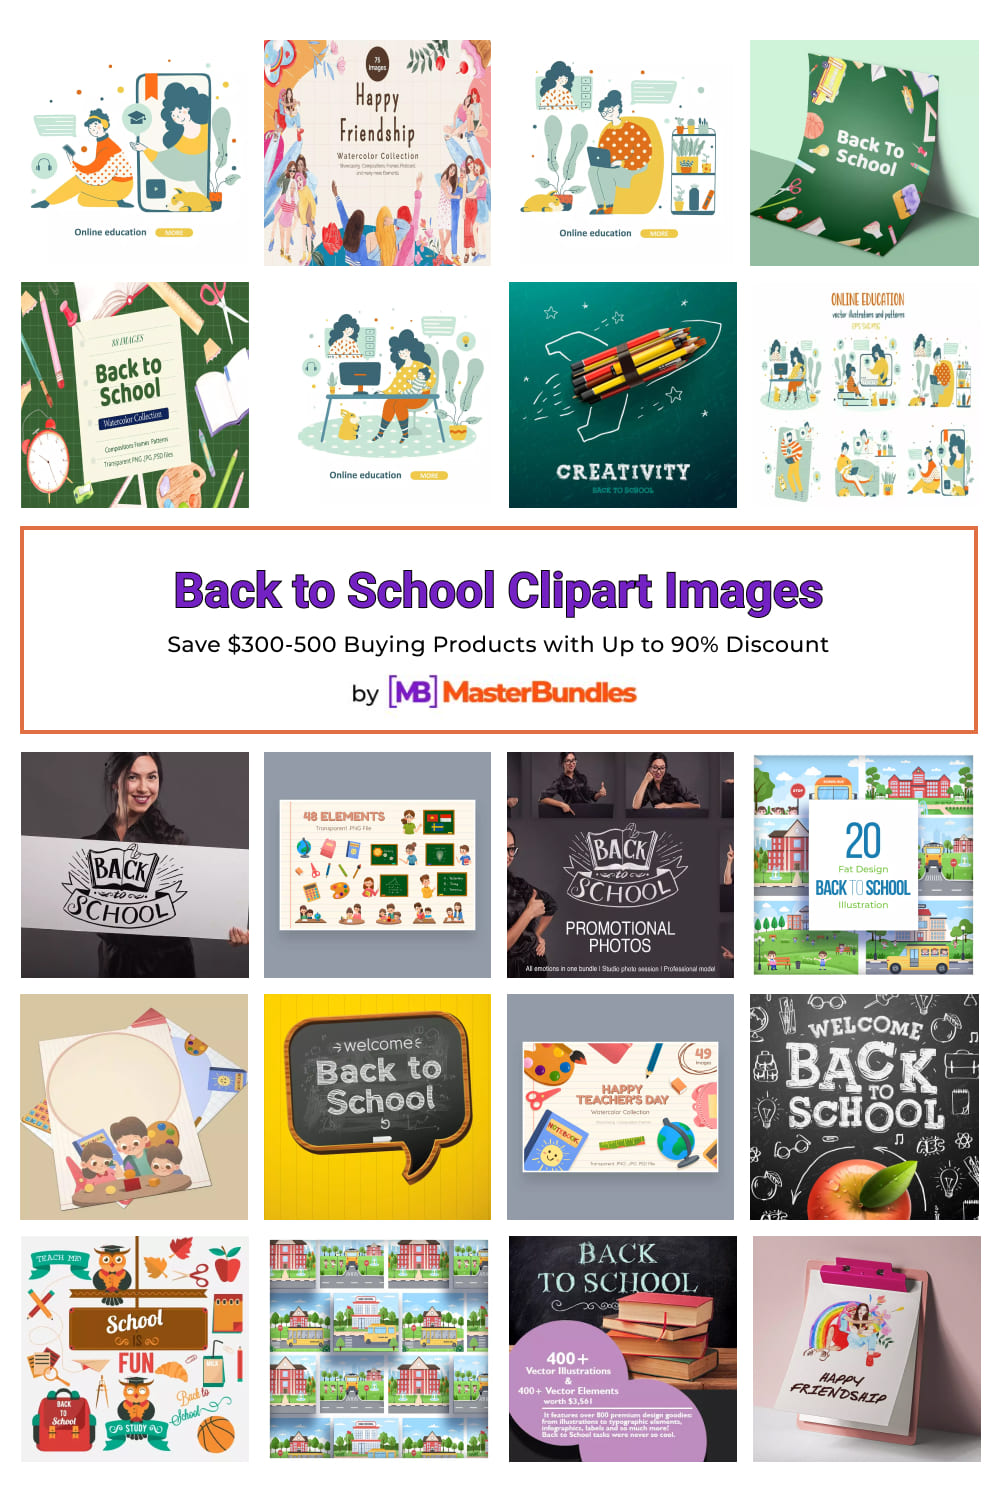 Back to School Clipart Images Pinterest image.